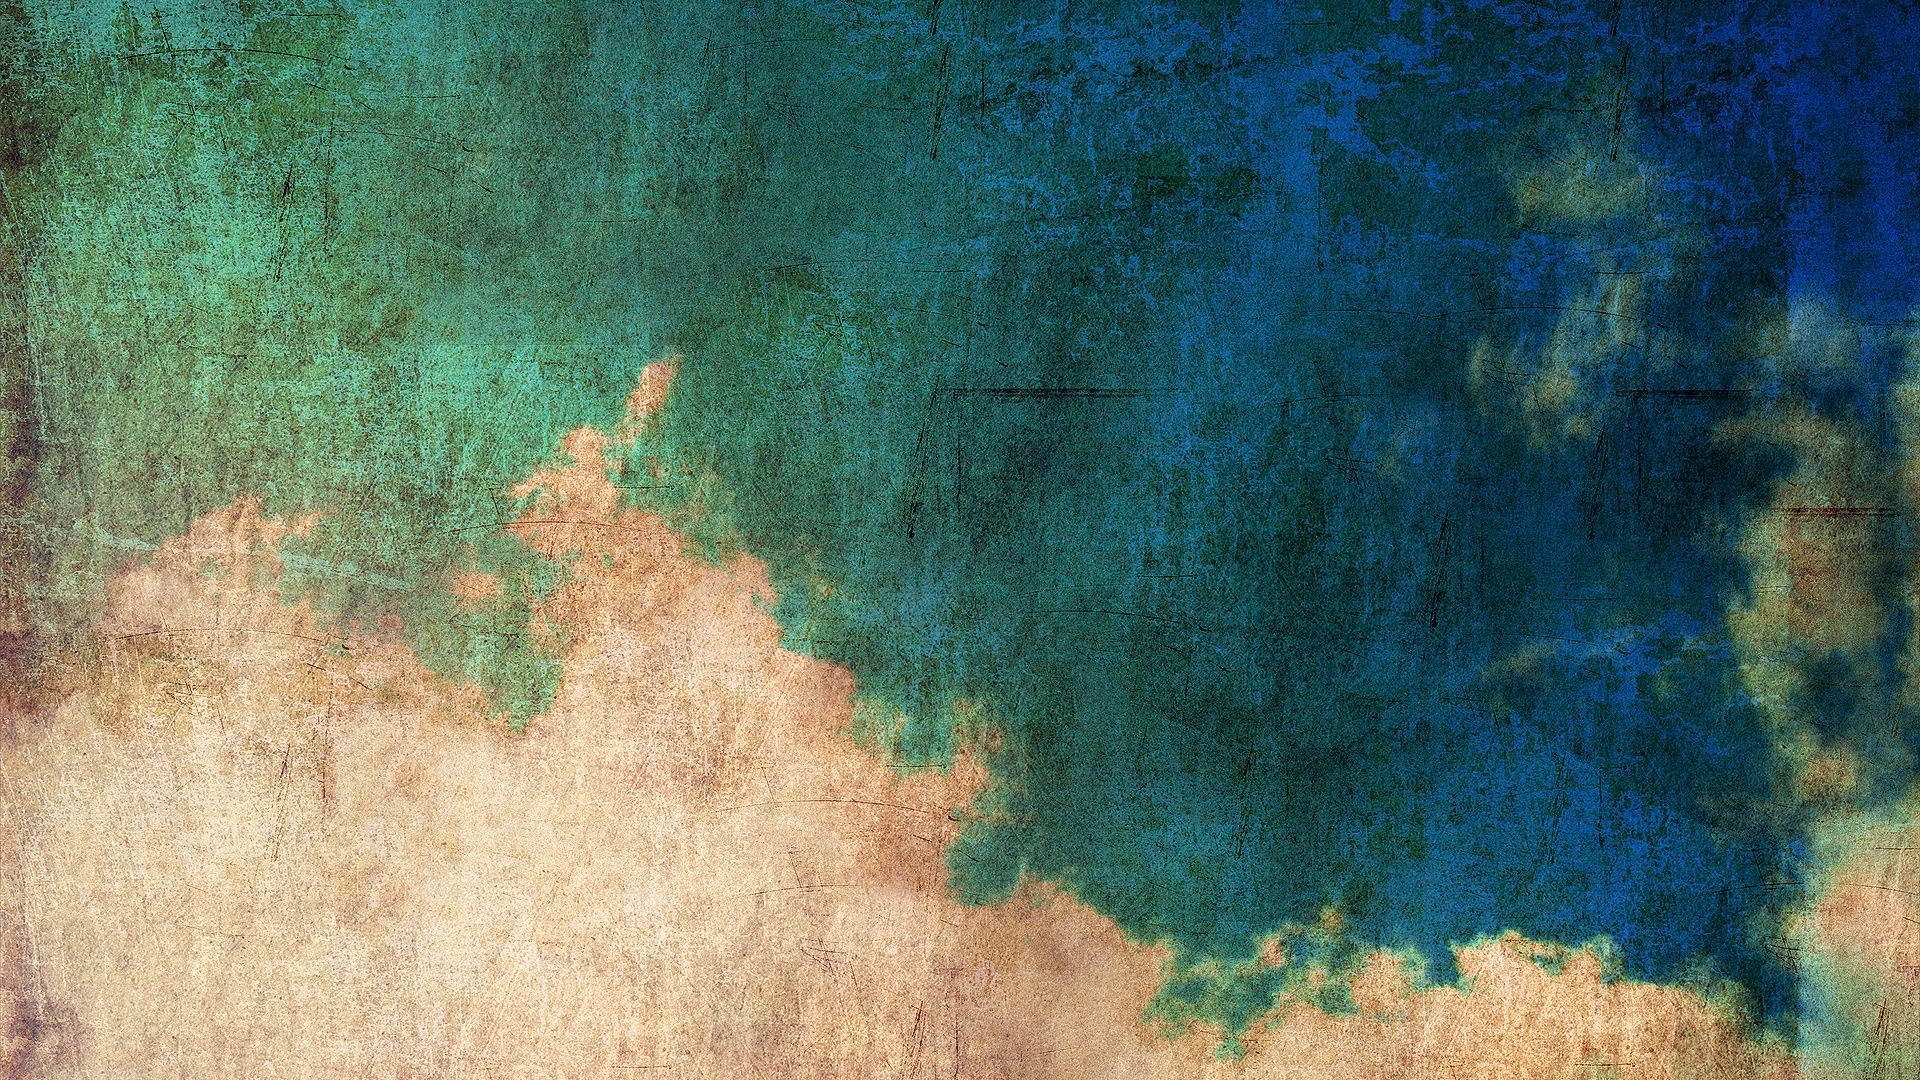 vintage wallpaper hd, green, blue, sky, turquoise, pattern, design, atmosphere, grass, watercolor paint, painting